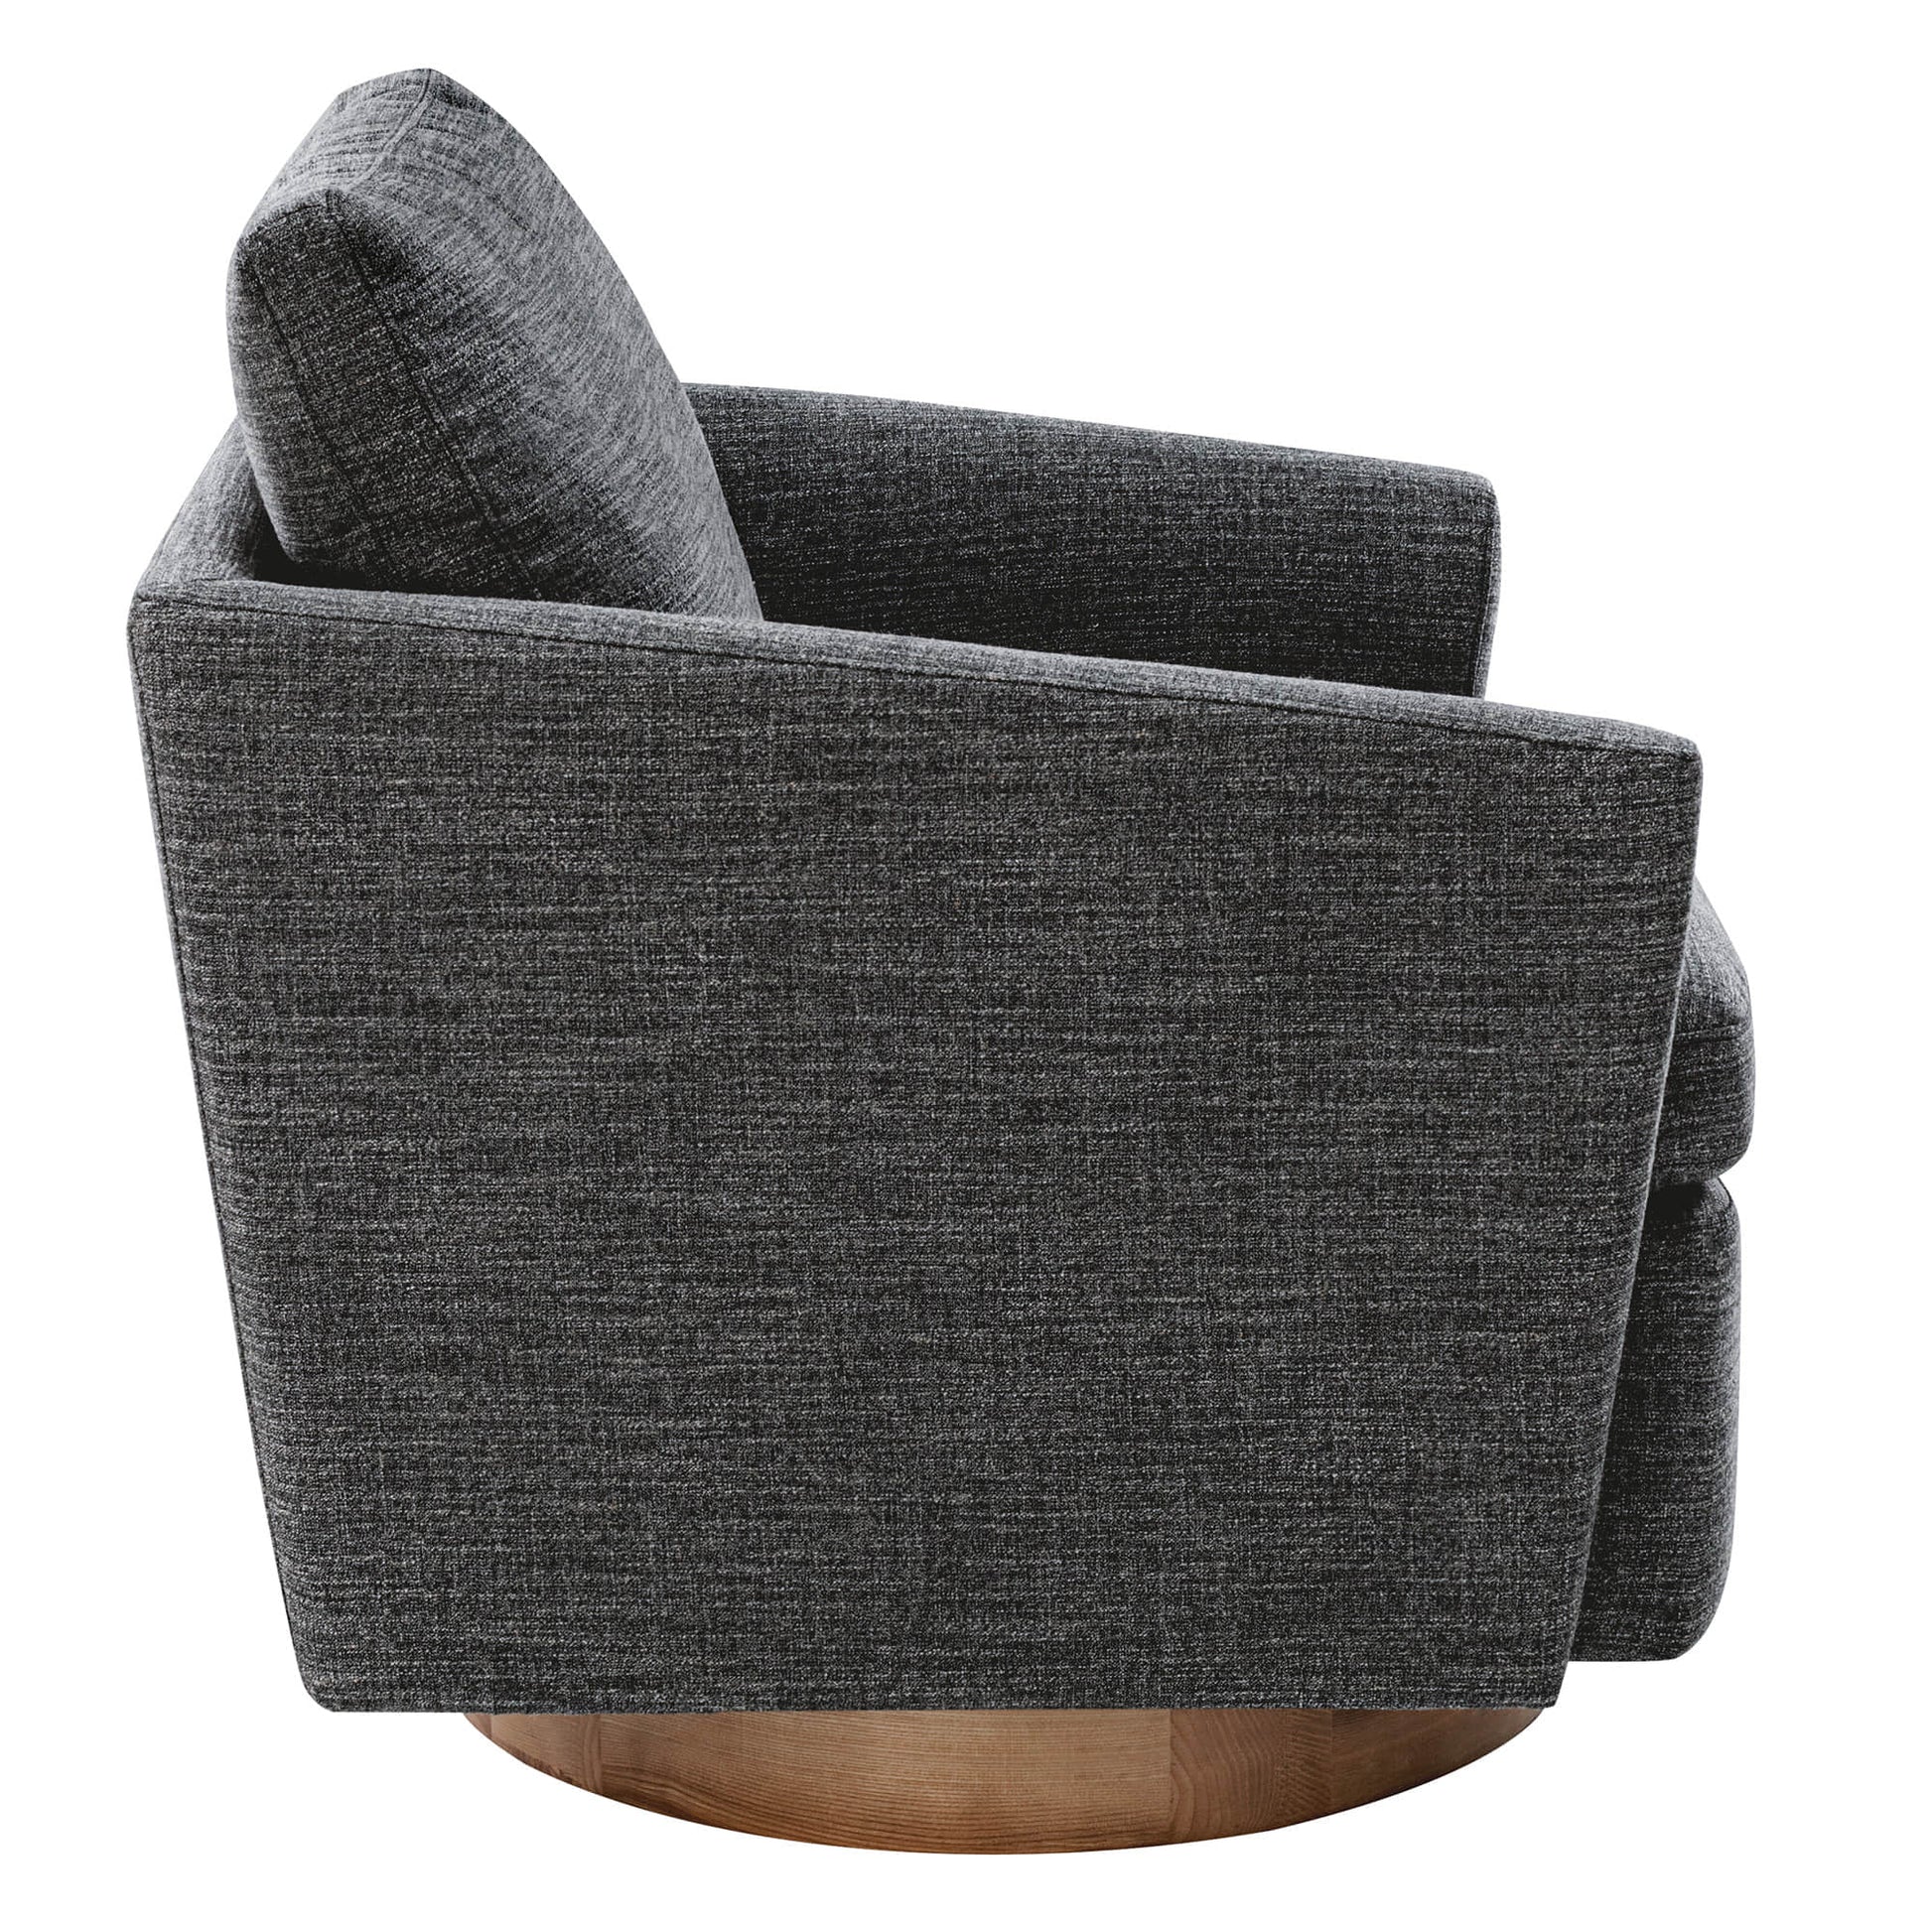 CHITA LIVING-Donella Modern Swivel Accent Chairs-Accent Chair-Fabric-Quarry Gray-